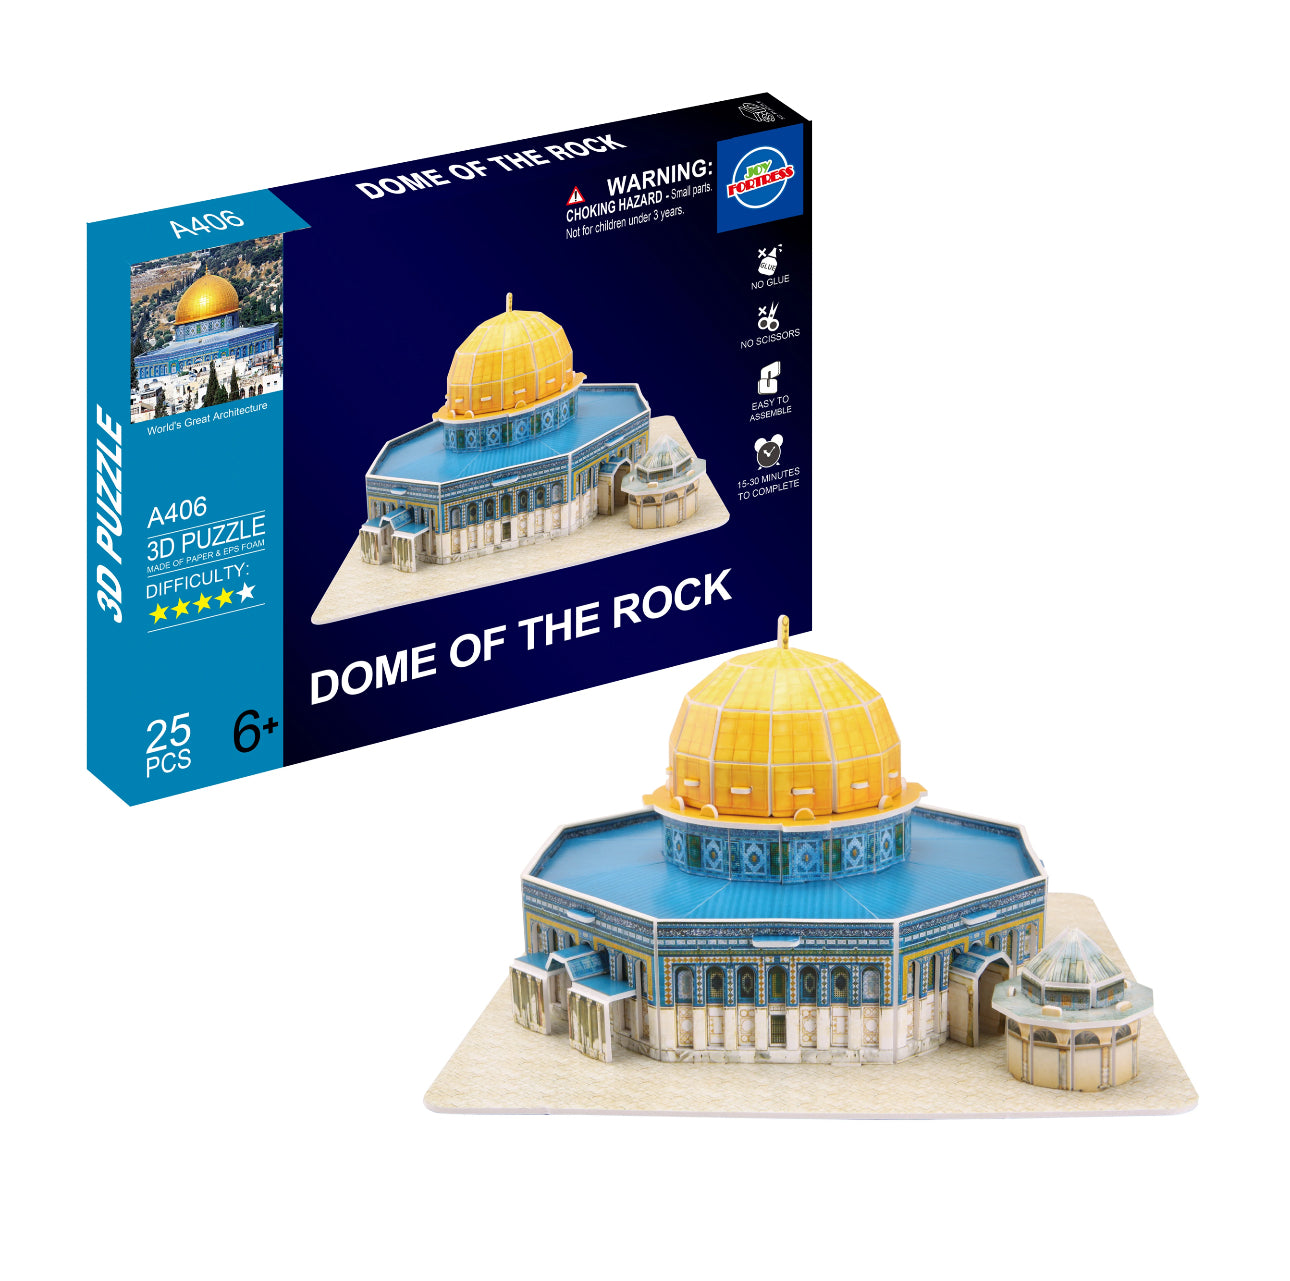 3D Puzzle of the Dome of the Rock | Educational and Decorative Model for Muslim Families